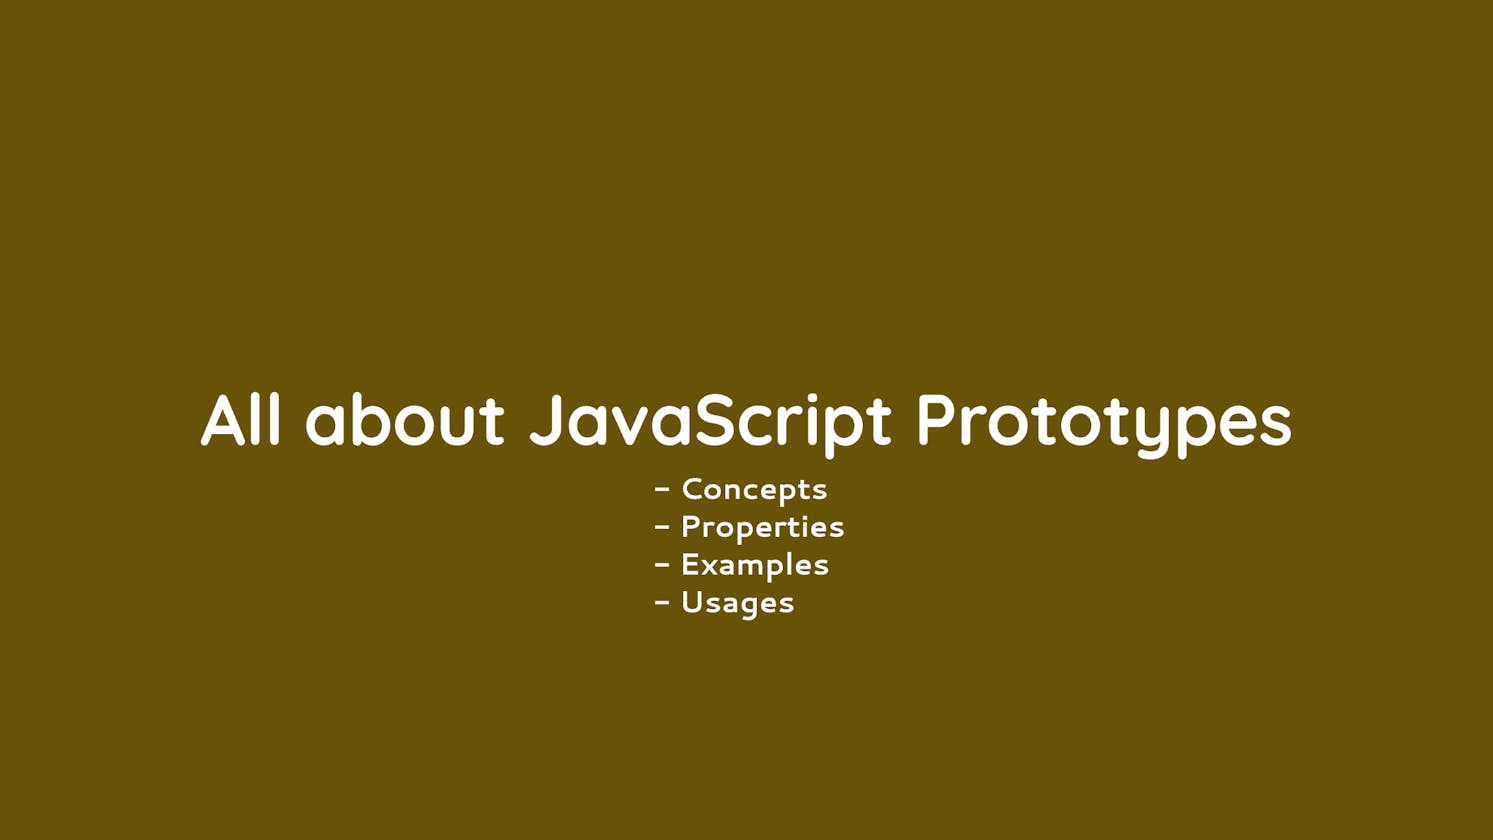 All about JavaScript Prototypes